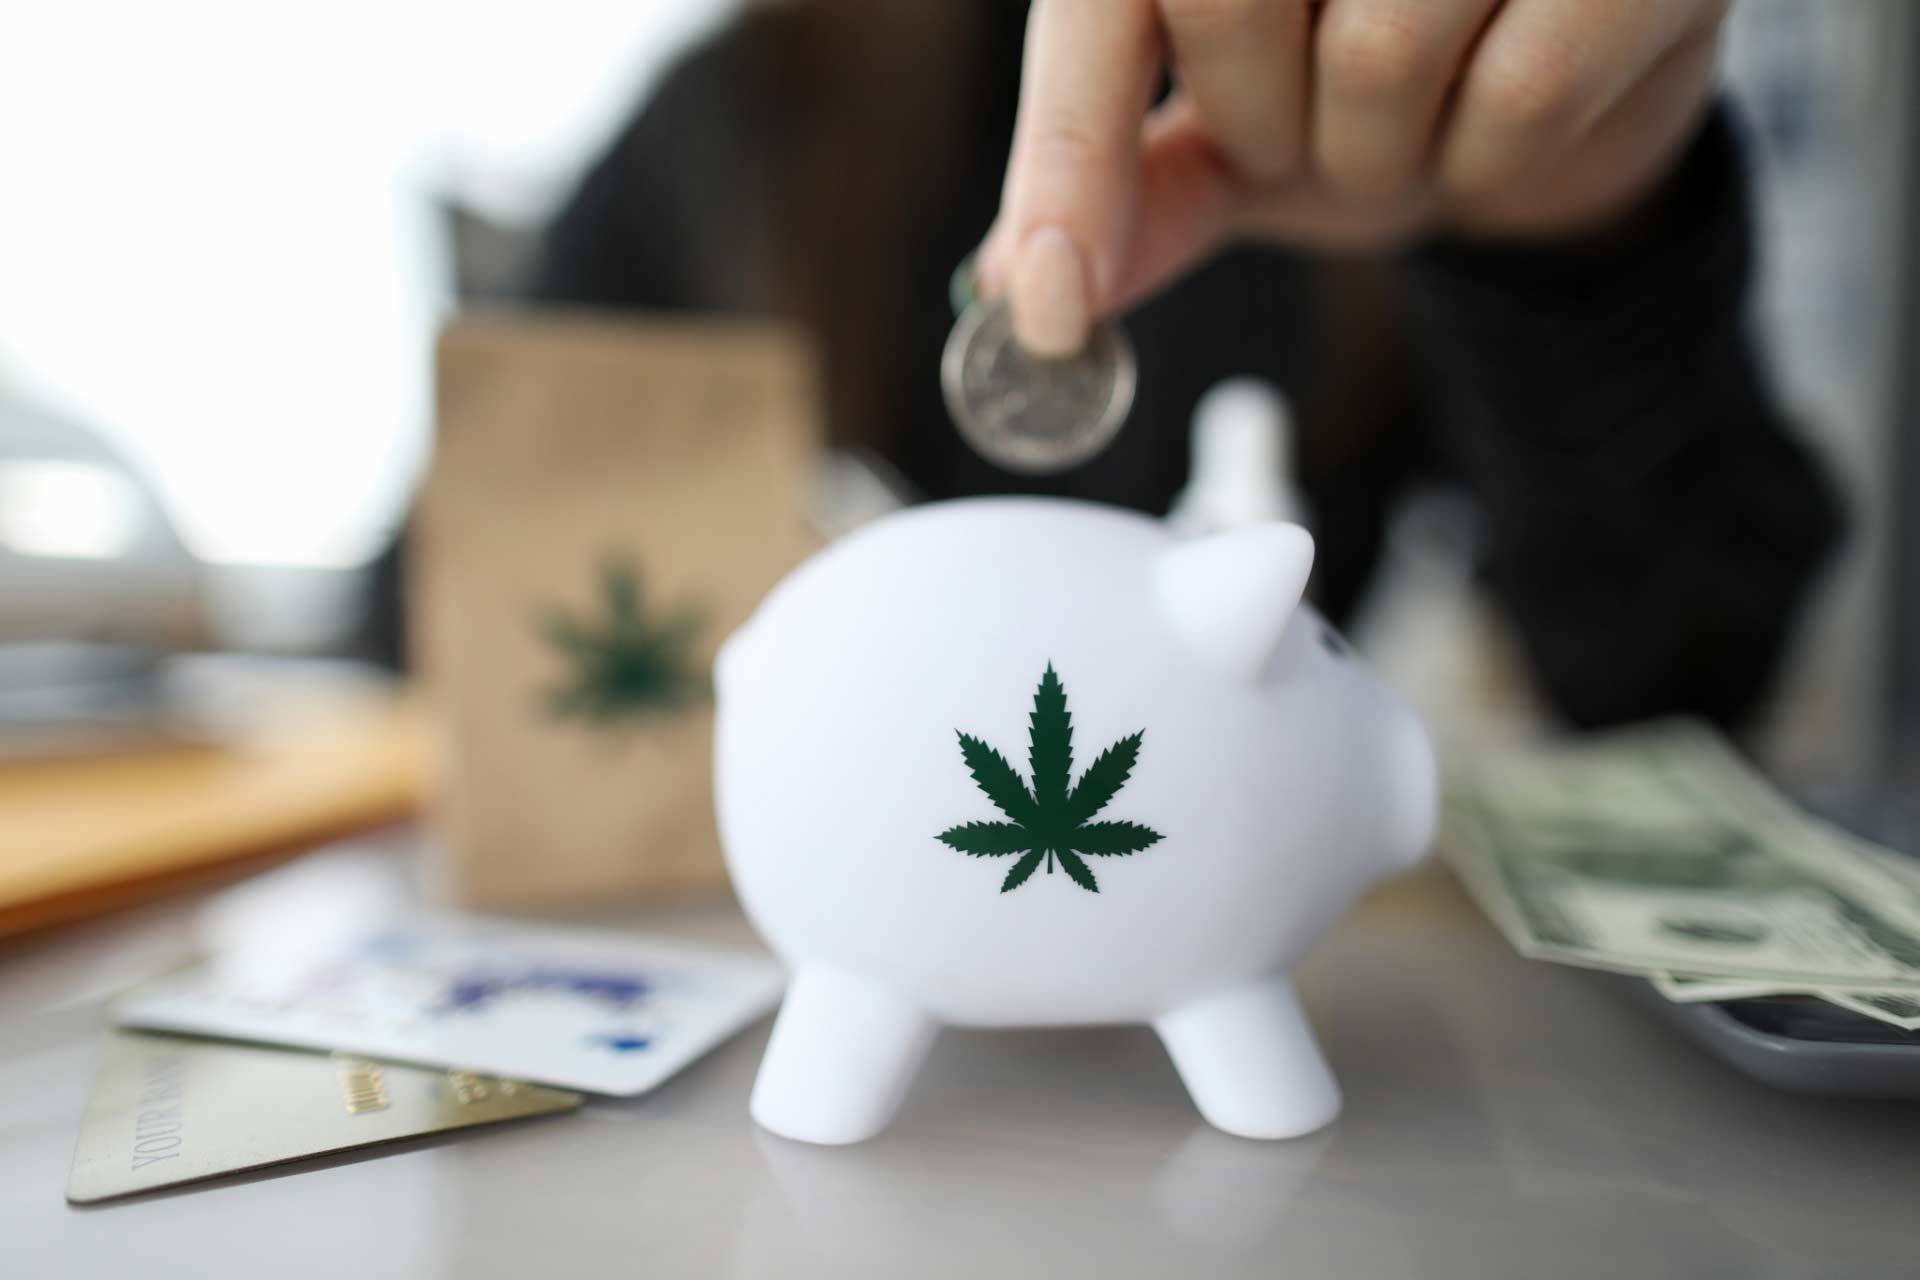 Hand putting quarter in piggy bank with cannabis symbol, after saving money on cannabis